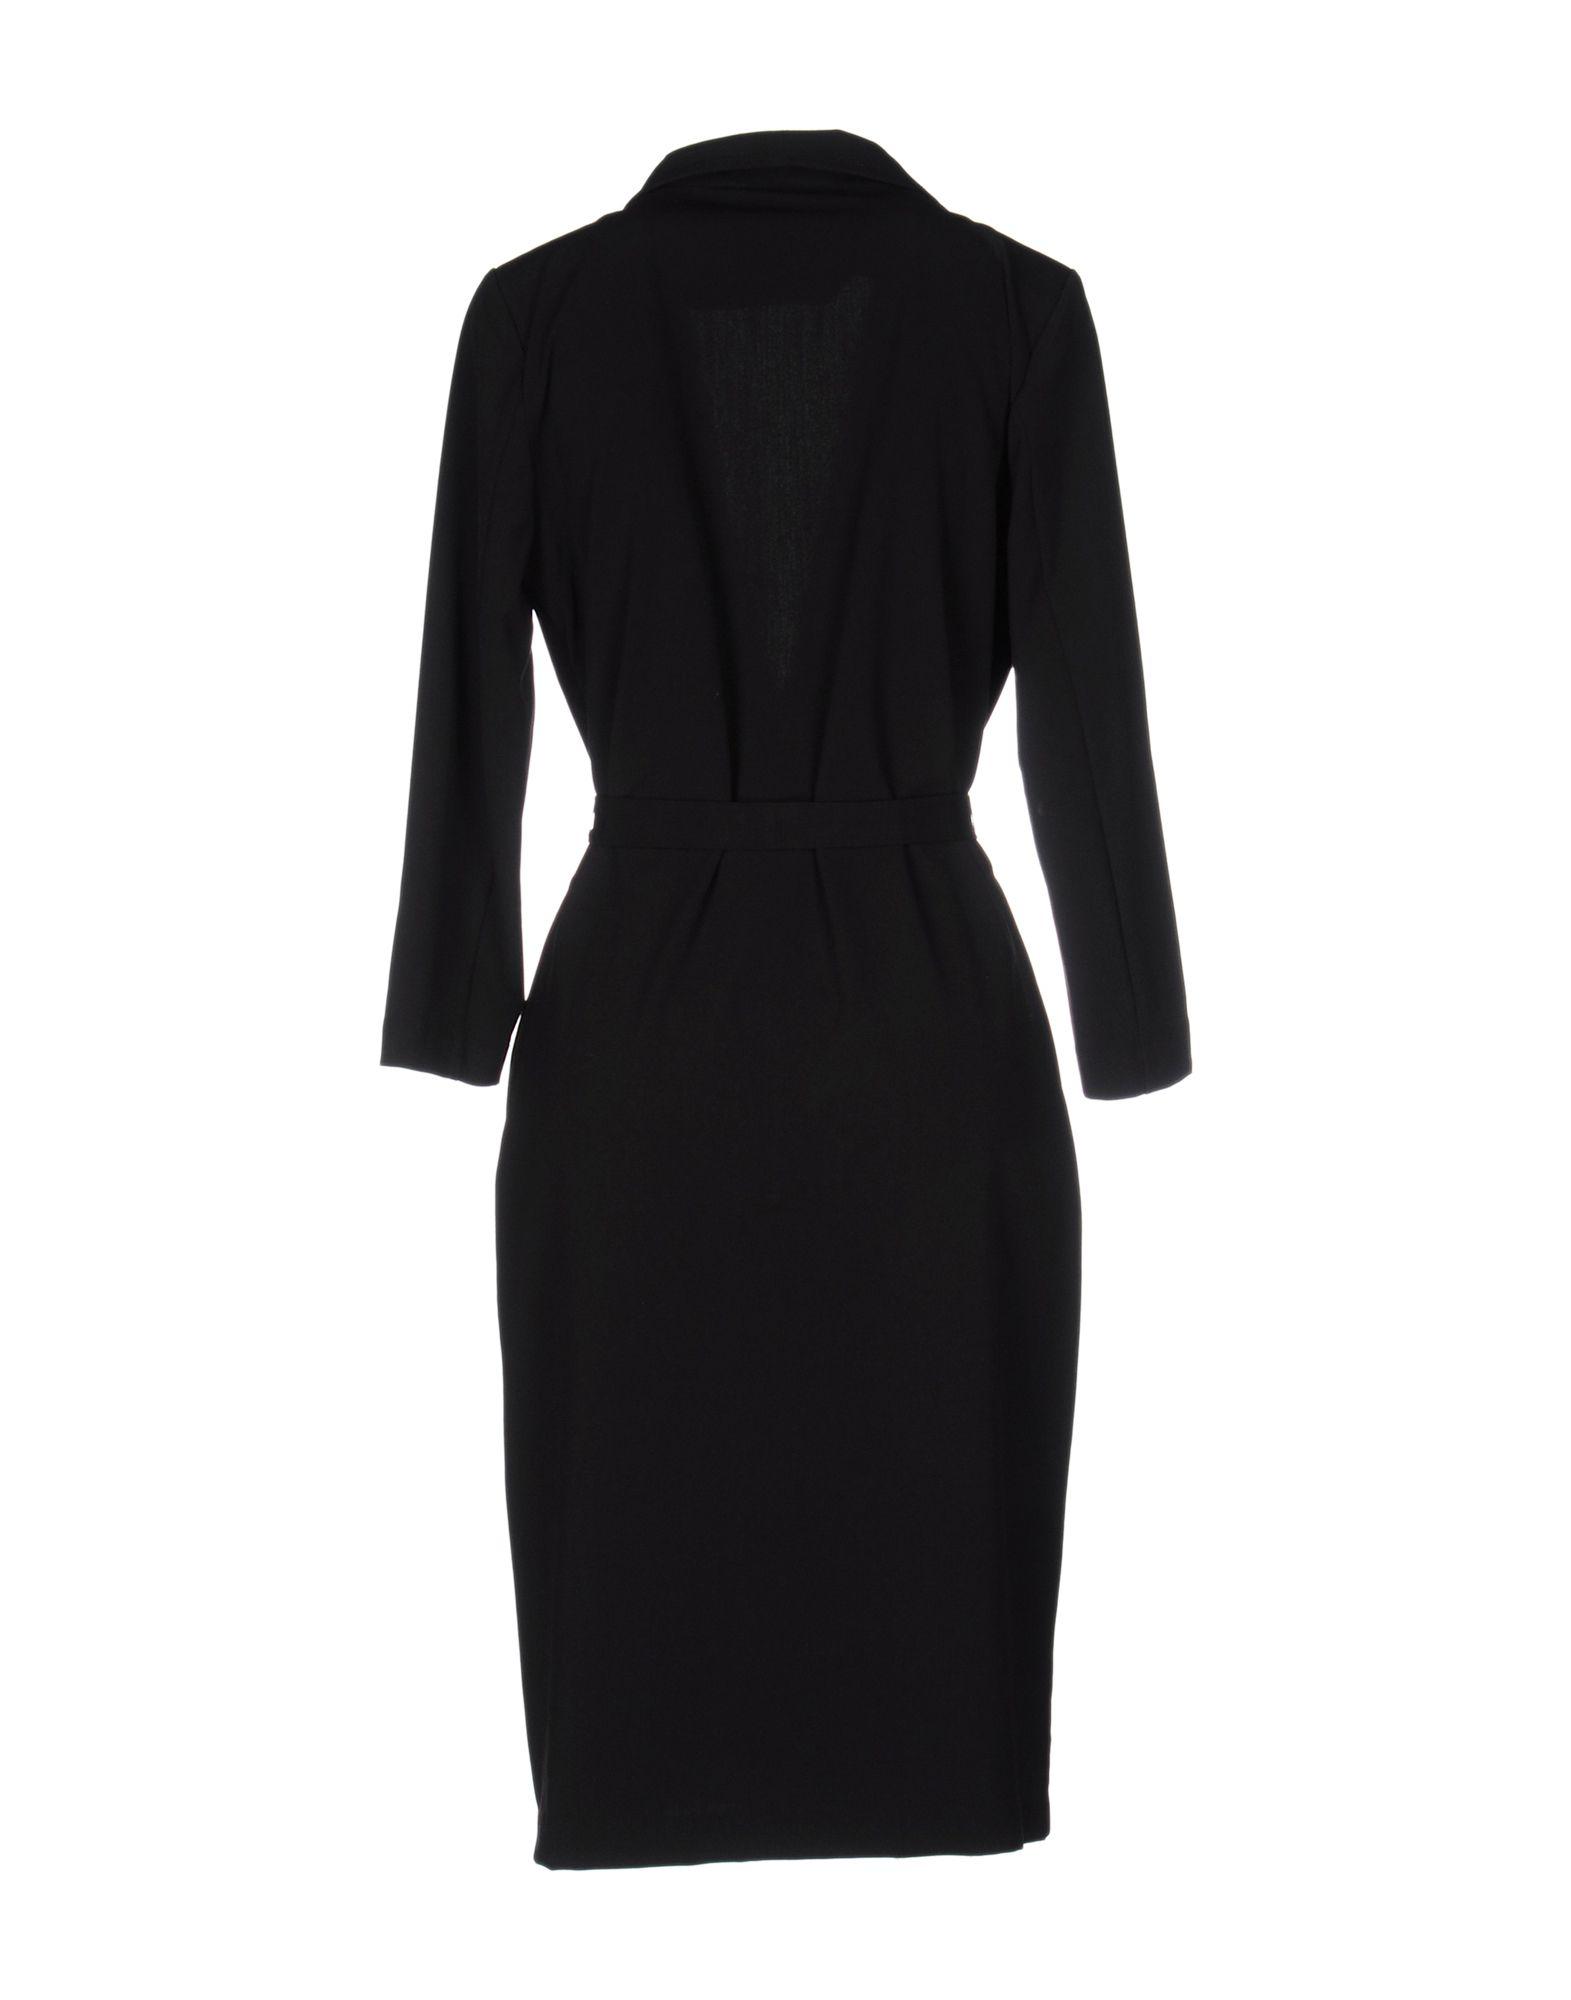 ONLY Synthetic Knee-length Dress in Black - Lyst